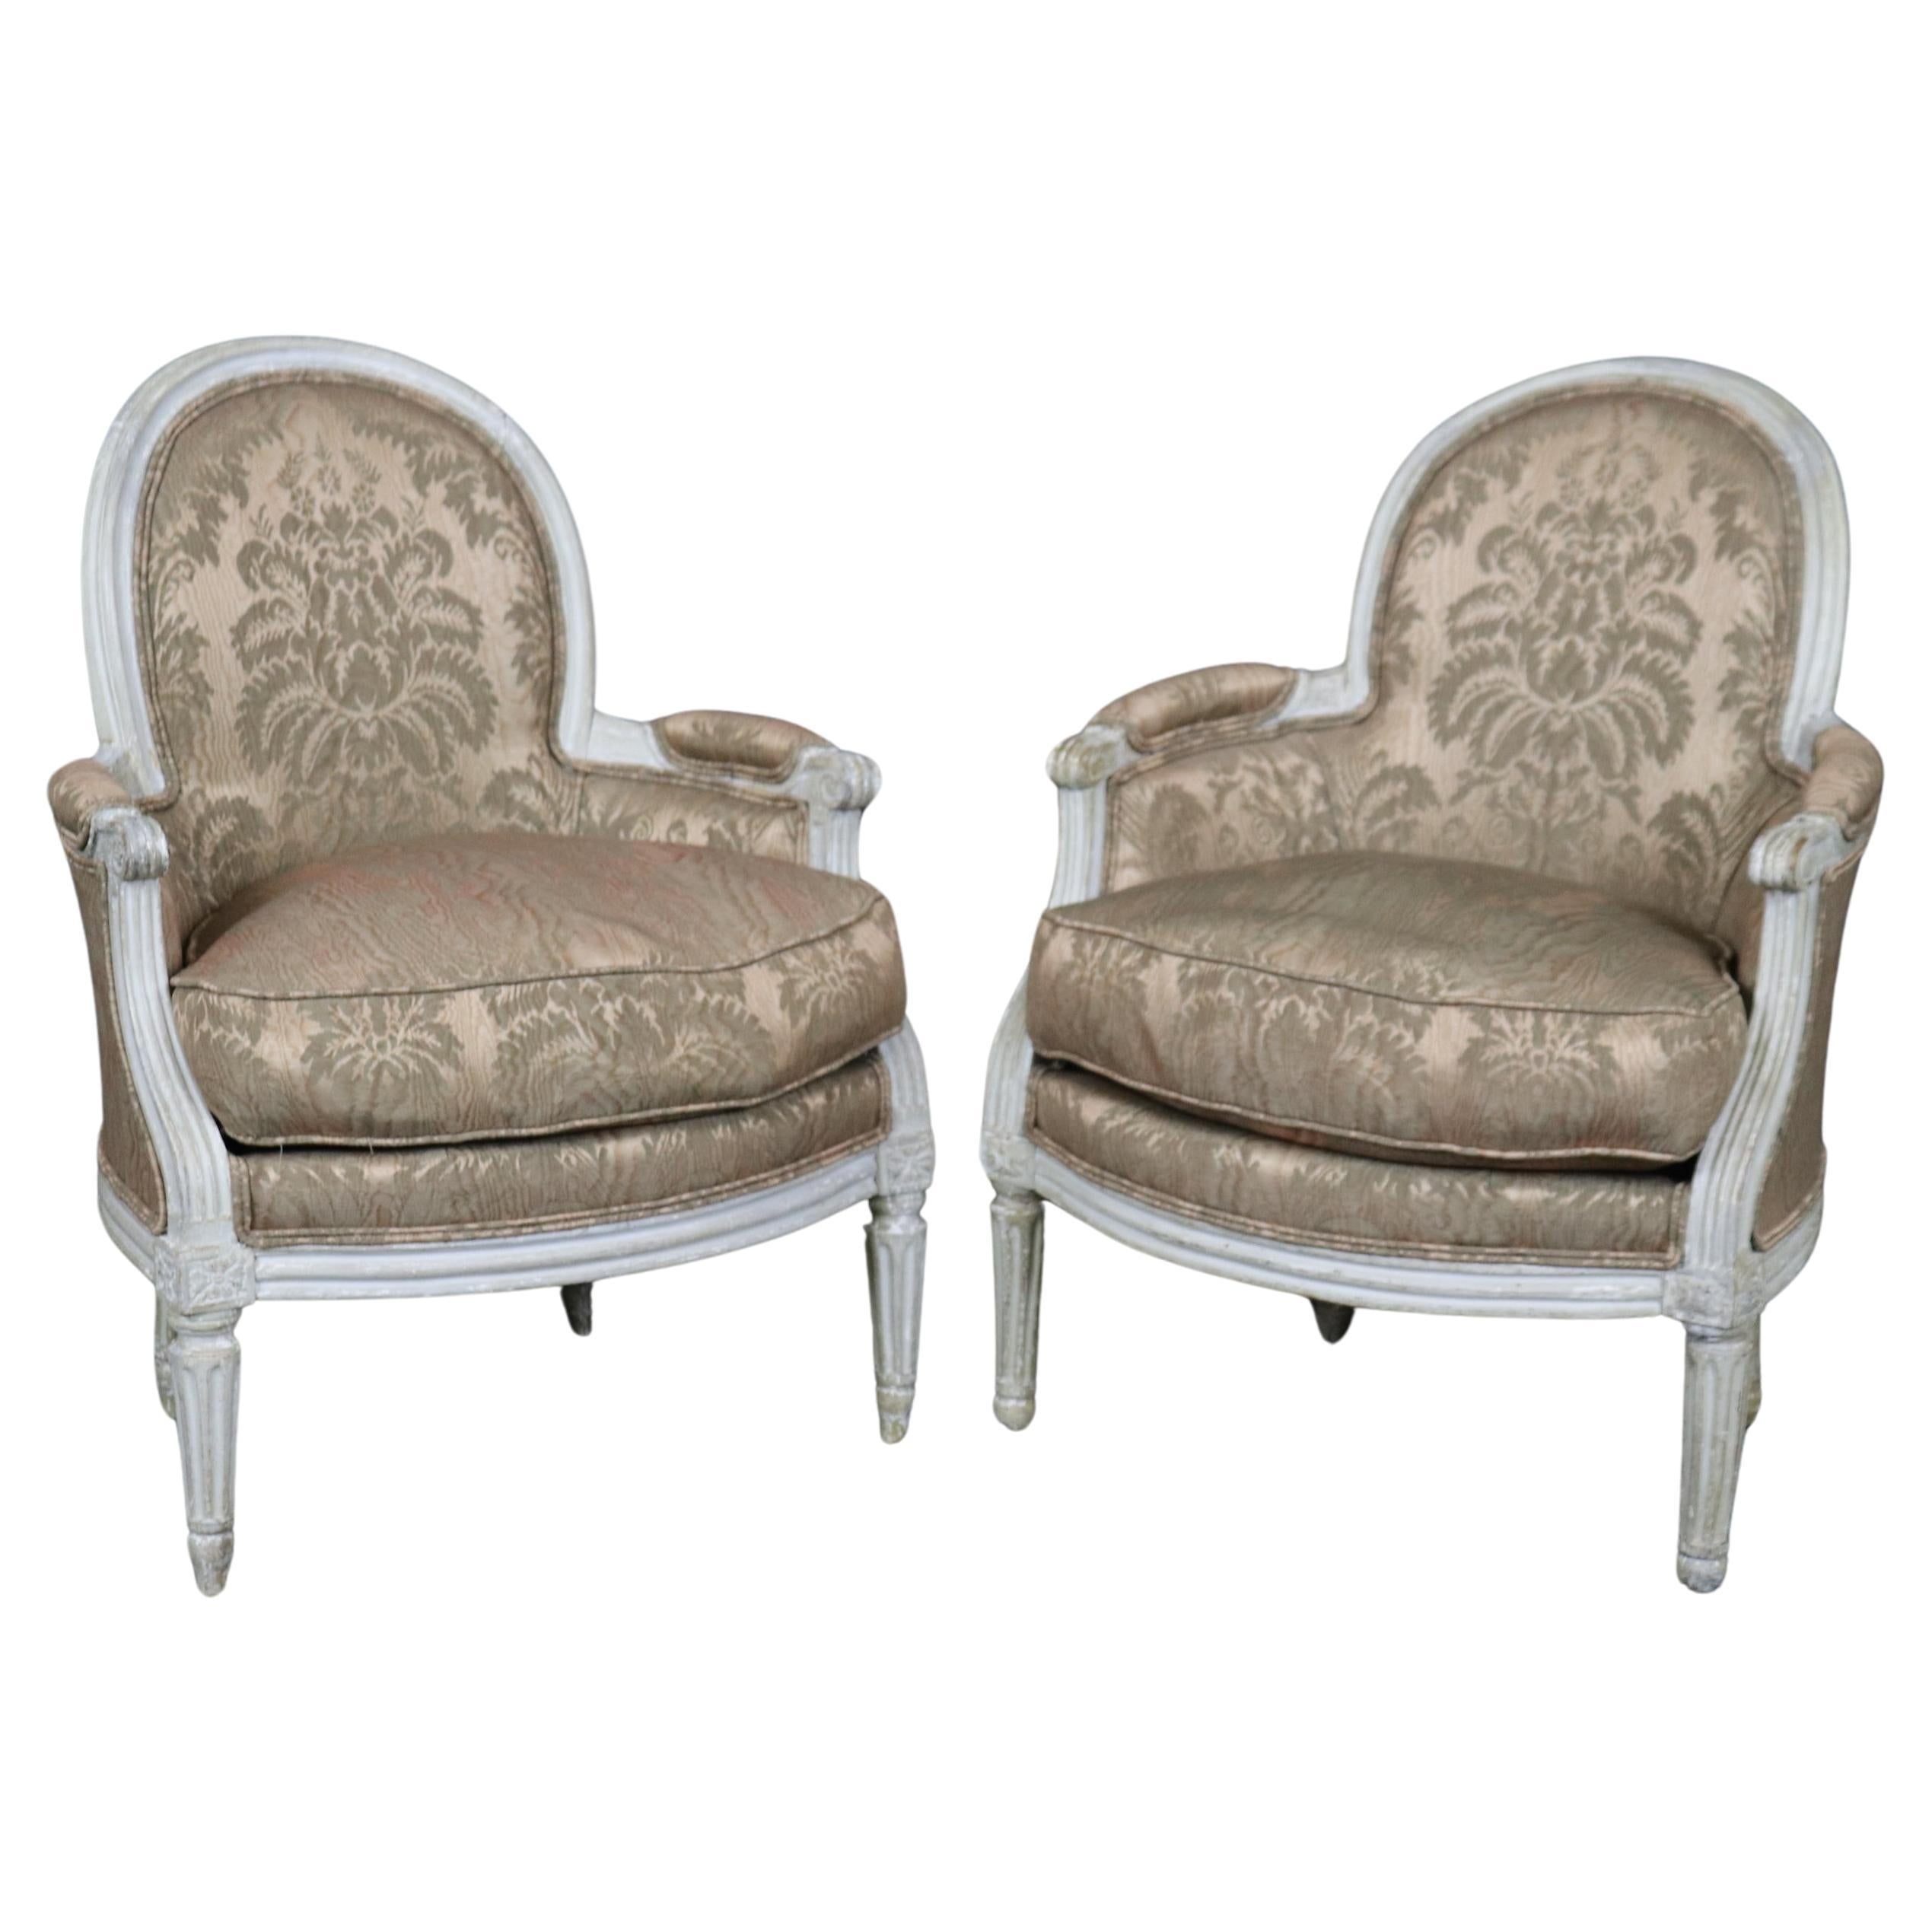 Ultra Rare Pair of Petite Sized Balloon Back French Louis XVI Bergere Chairs For Sale